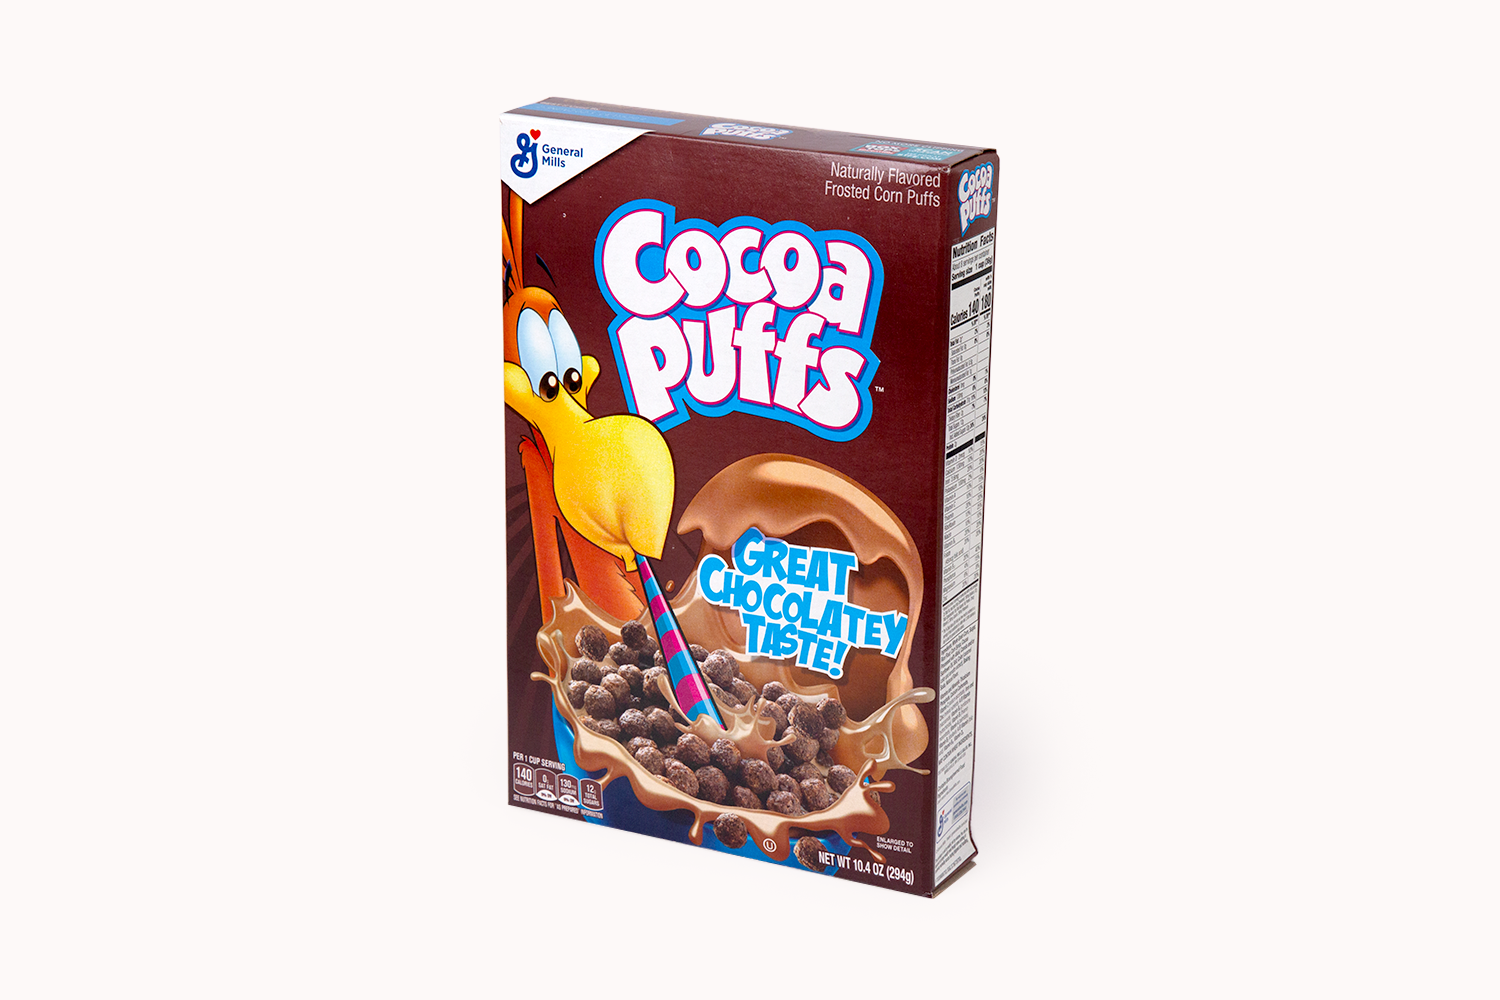 General Mills Cereal Cocoa Puffs